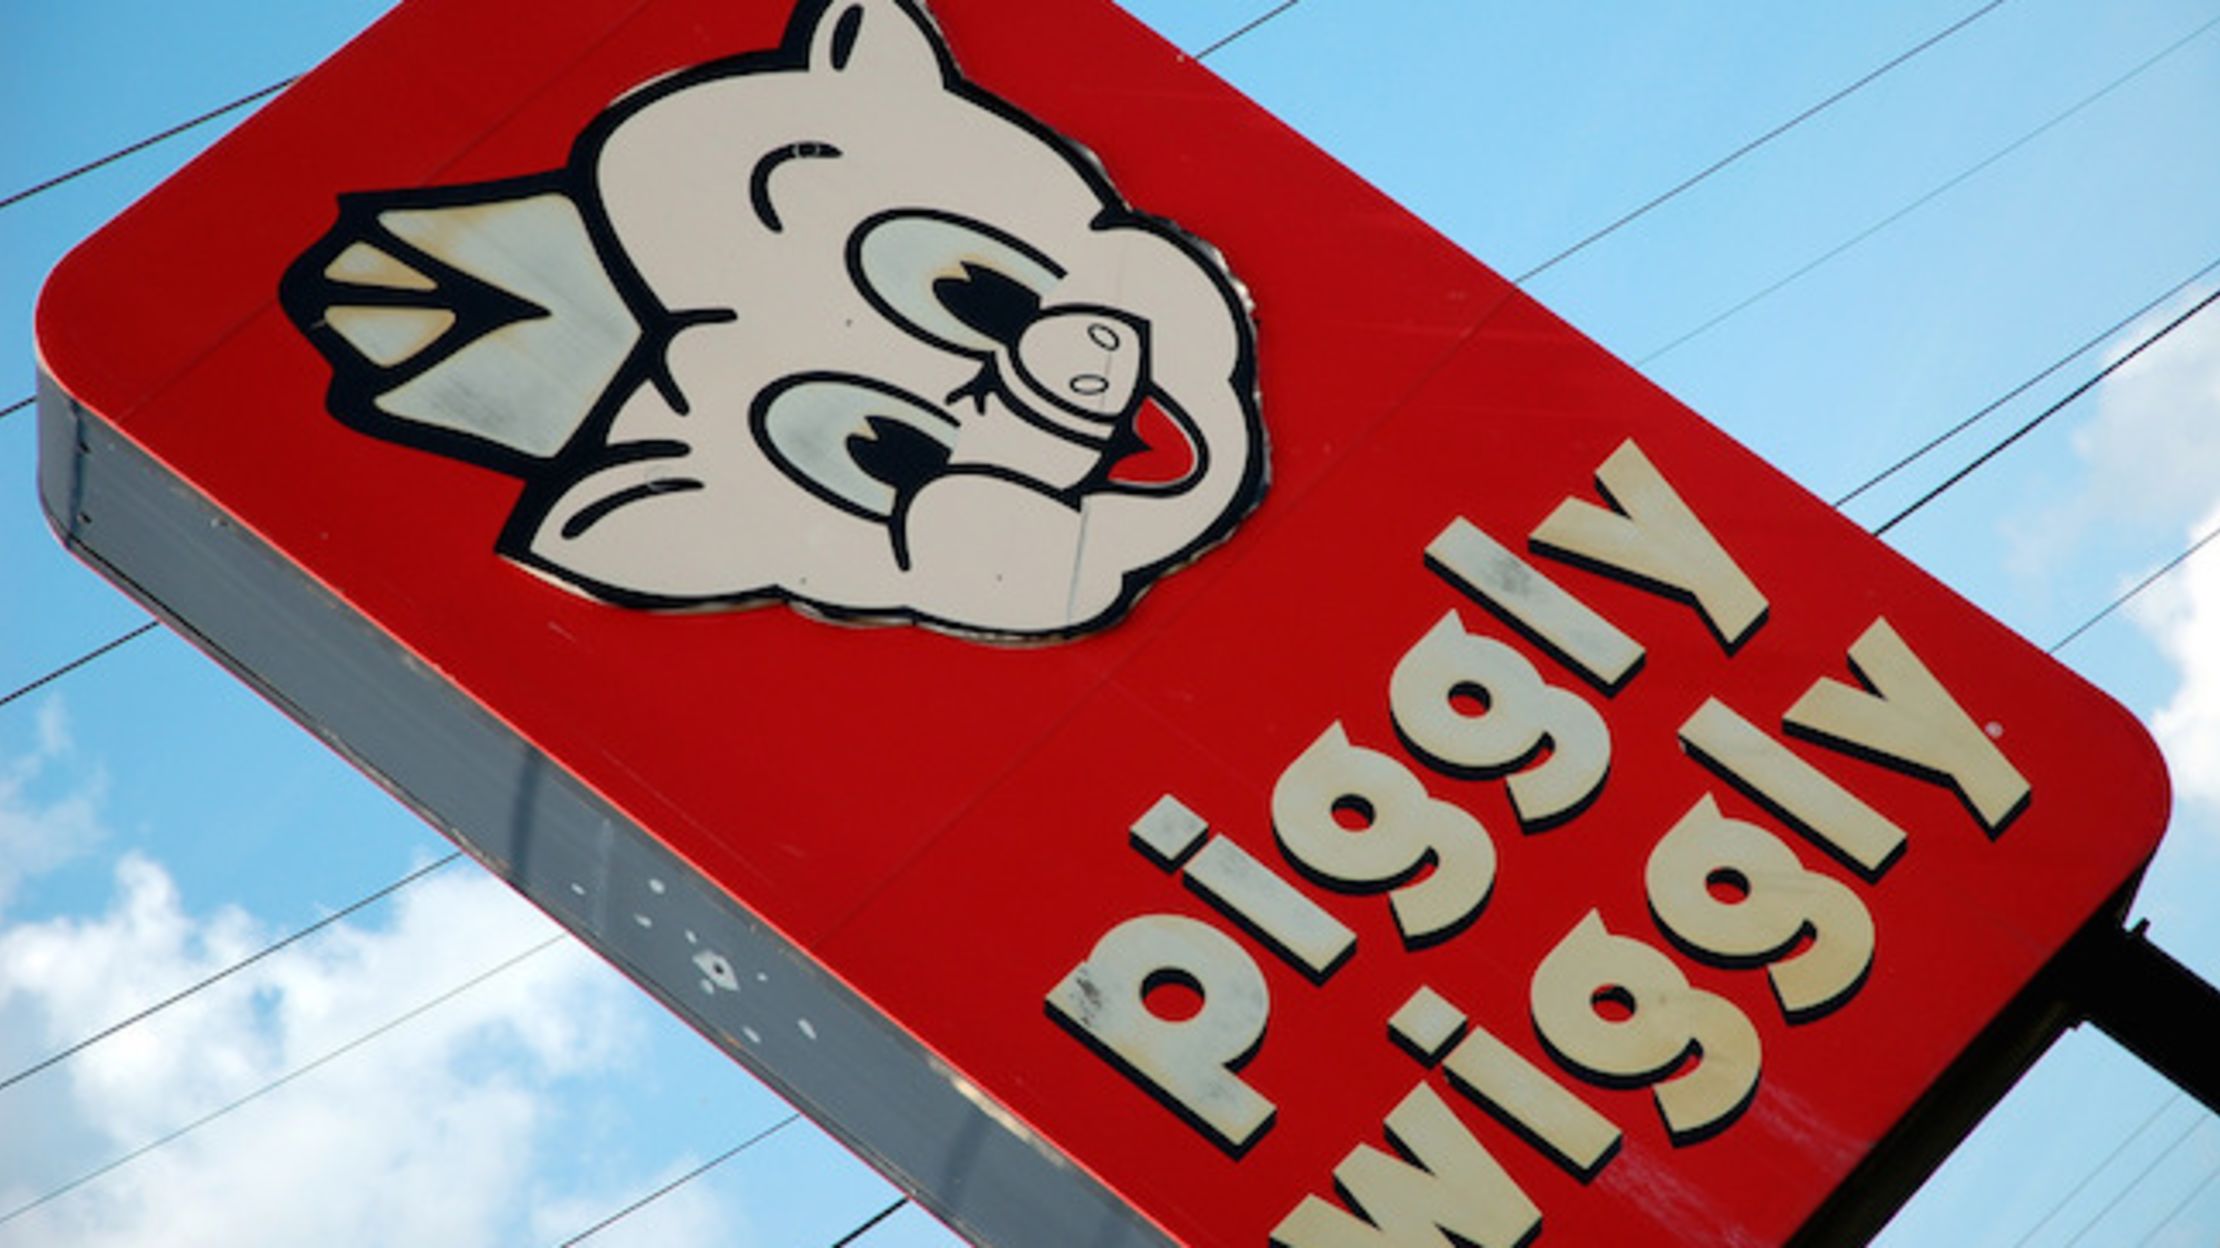 piggly wiggly job application